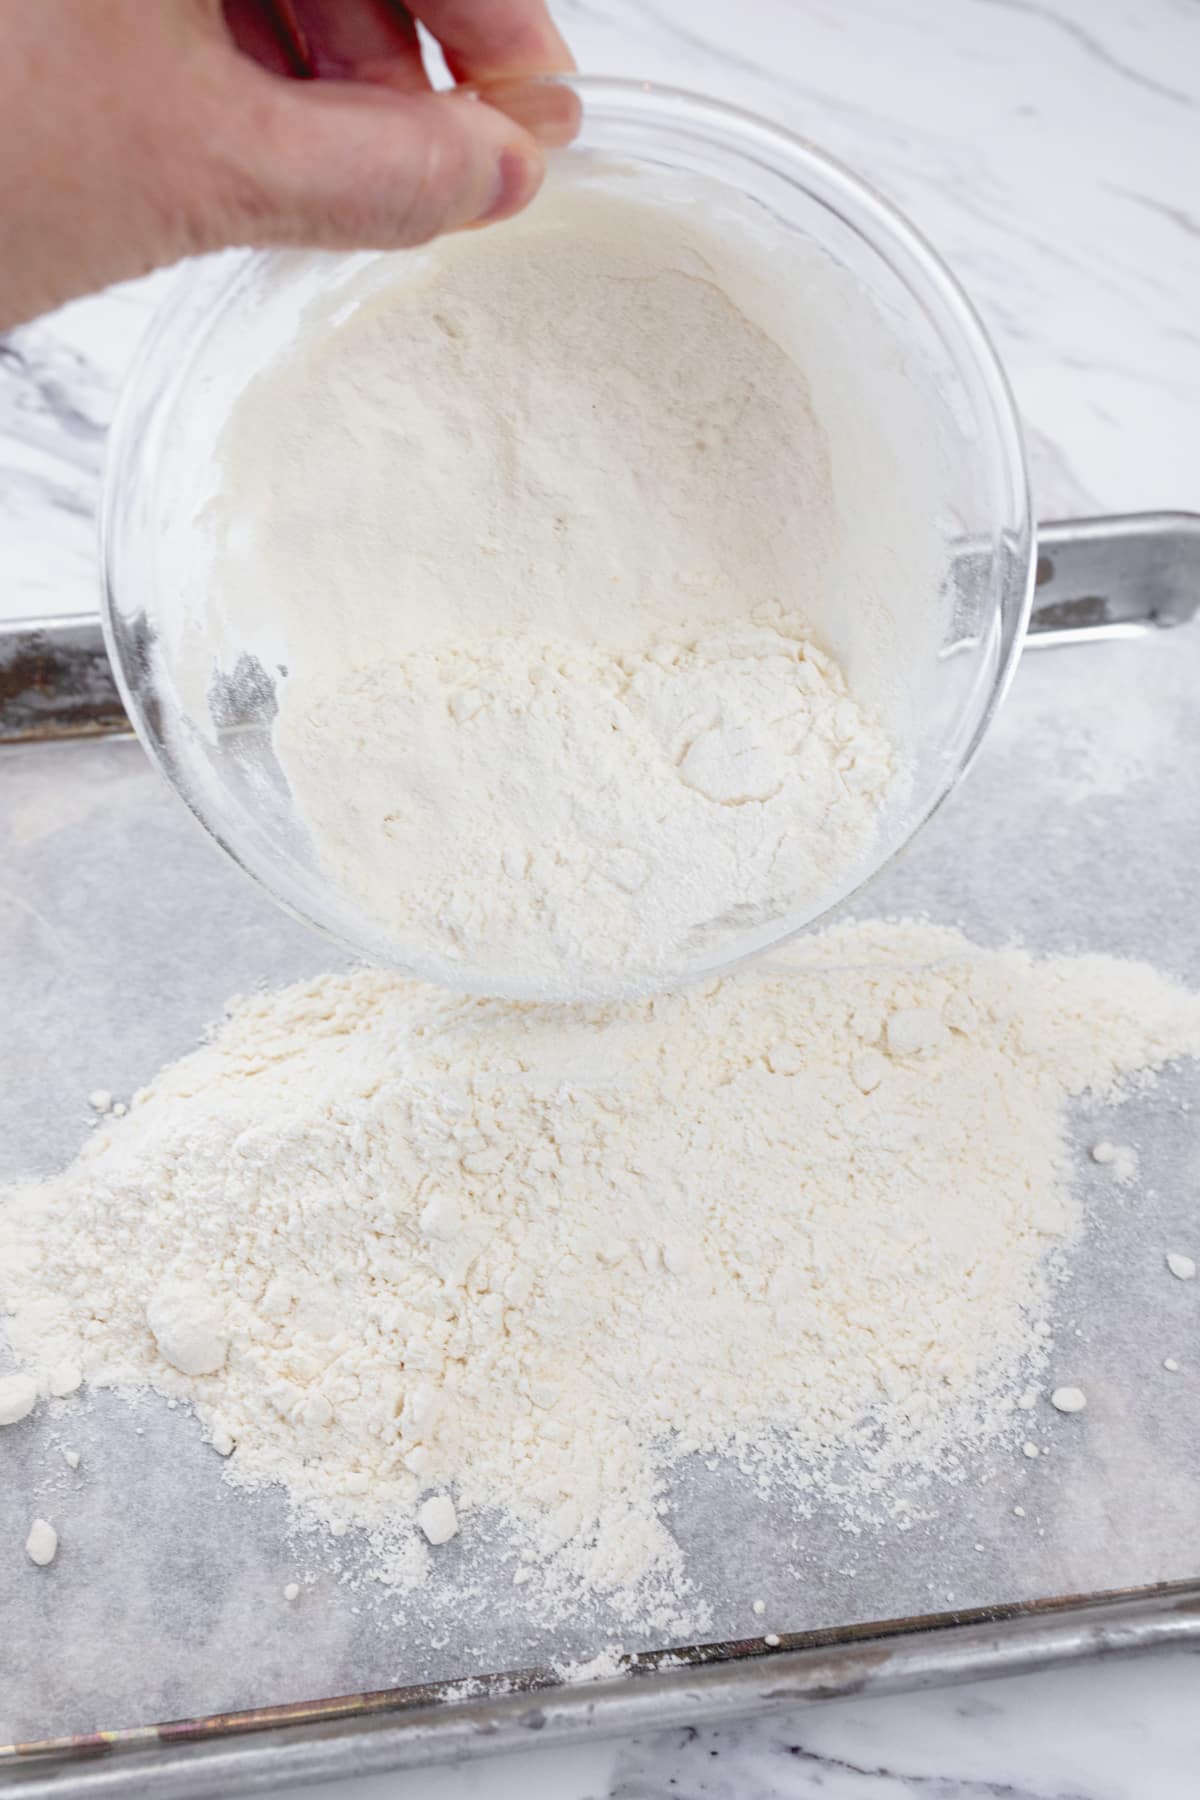 Close up view of flour in a microwavable bowl being poured onto a parchment-lined baking sheet.